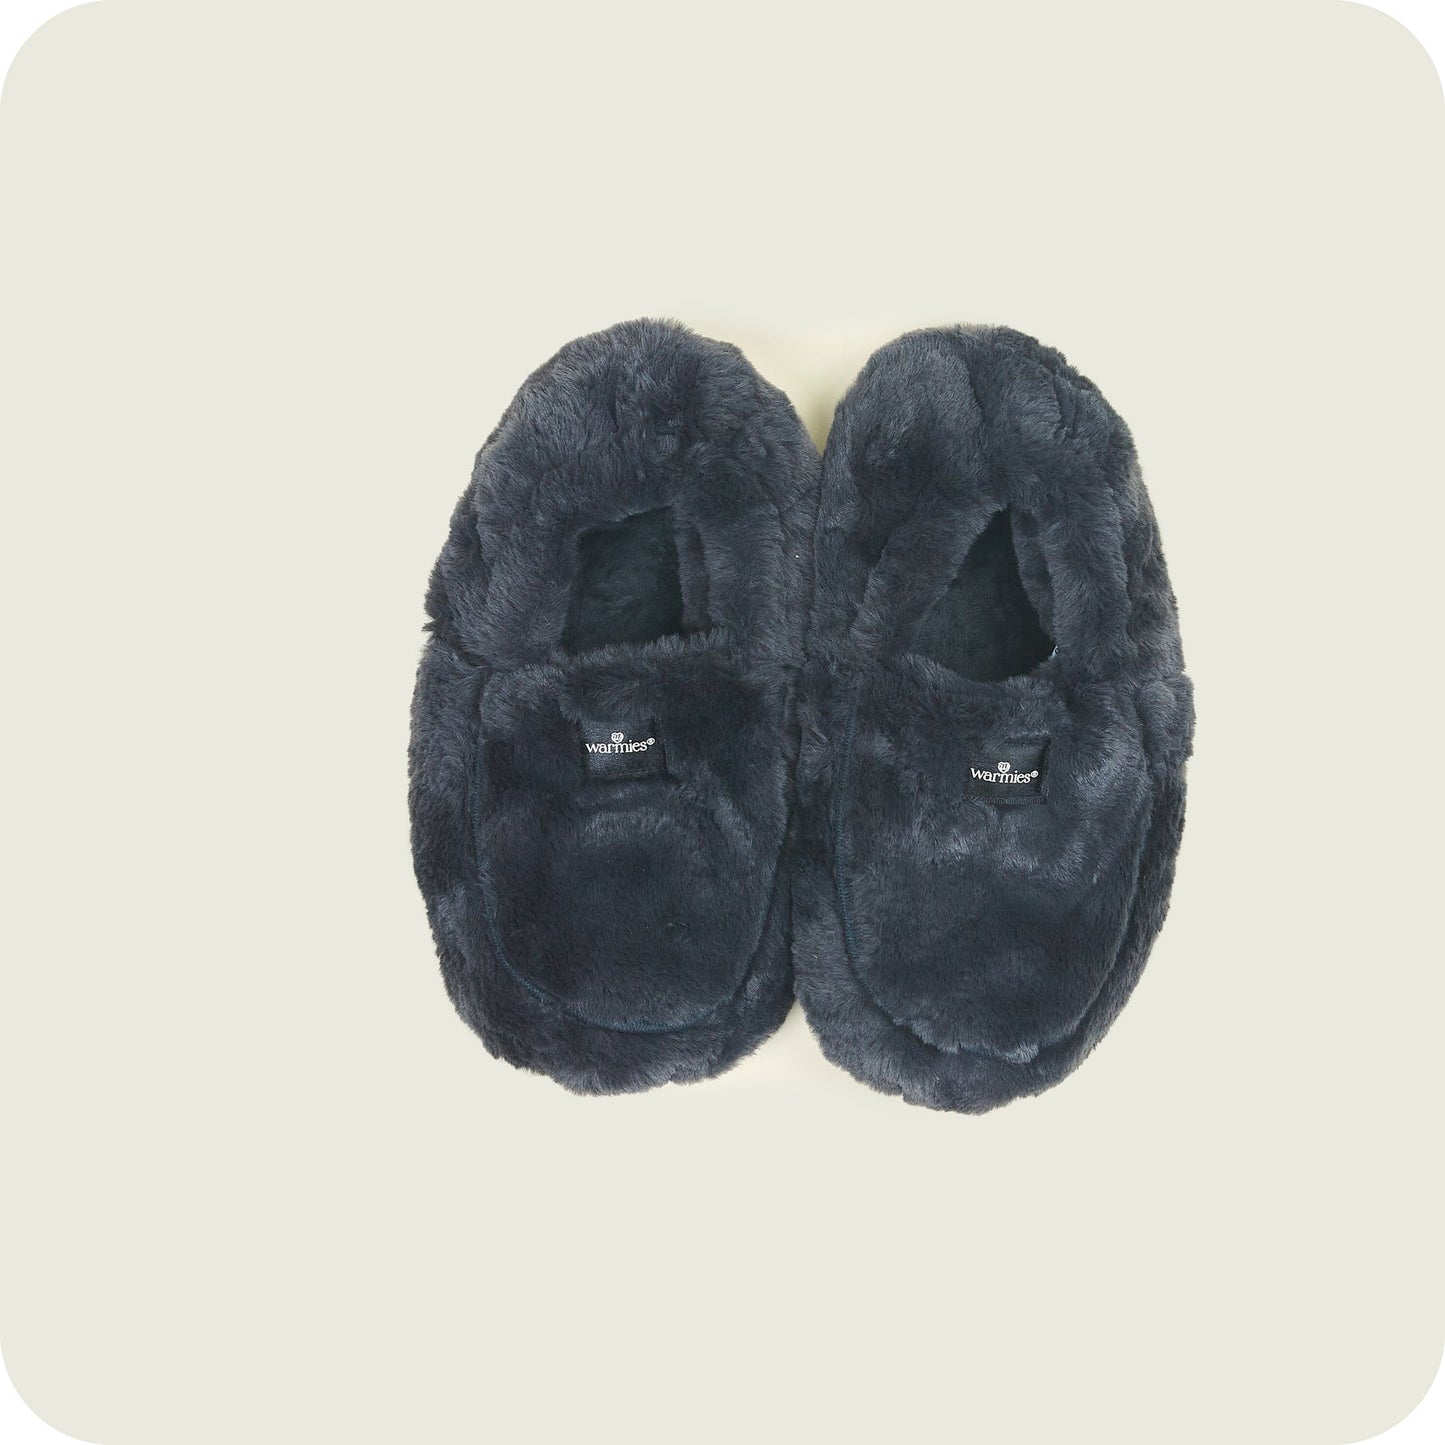 Warmies Luxury Slippers in Box - Charcoal